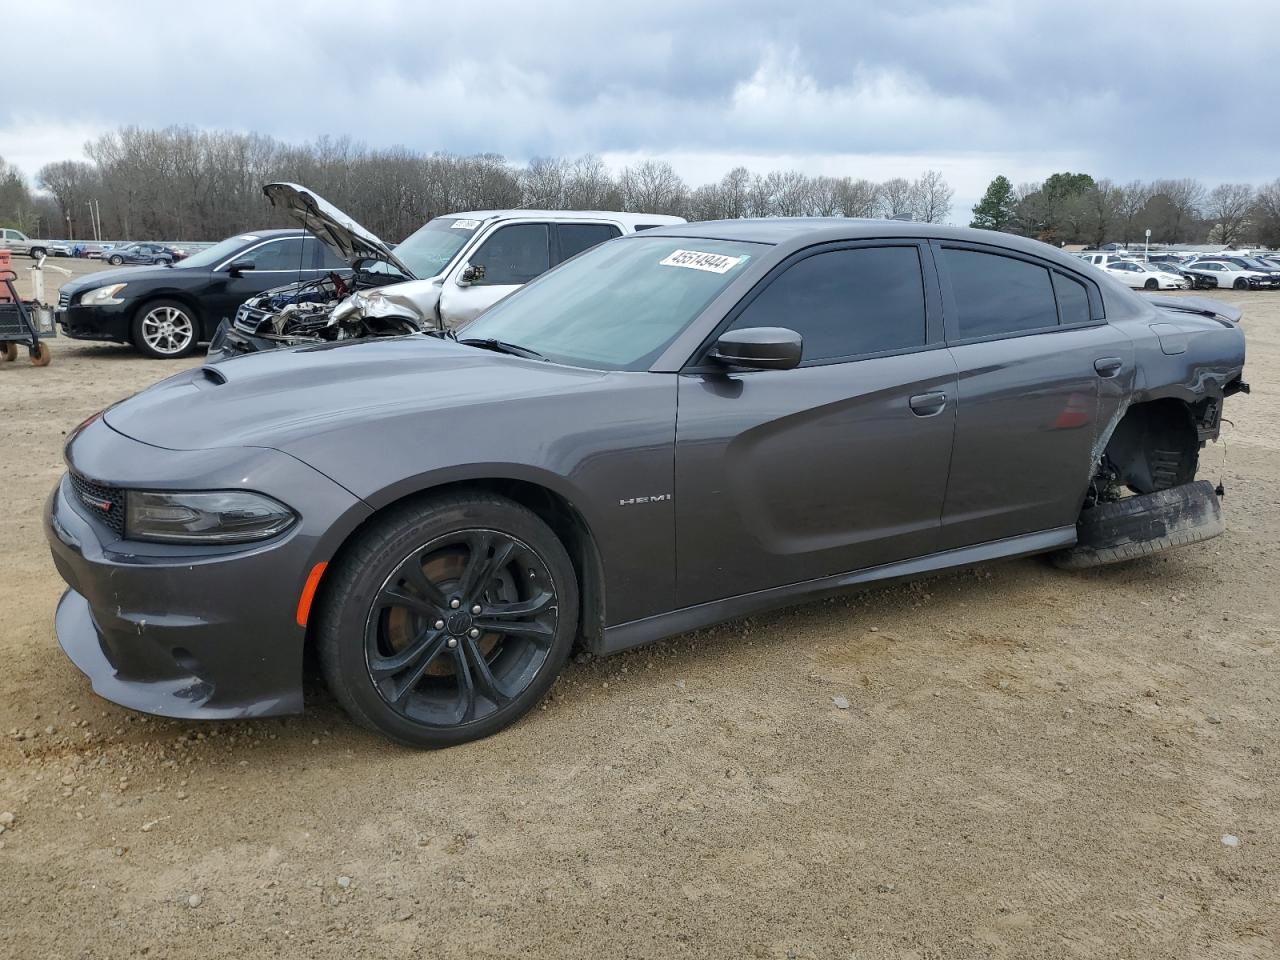 vin: 2C3CDXCT5LH176658 2C3CDXCT5LH176658 2020 dodge charger 5700 for Sale in 72032, Ar - Little Rock, Conway, USA